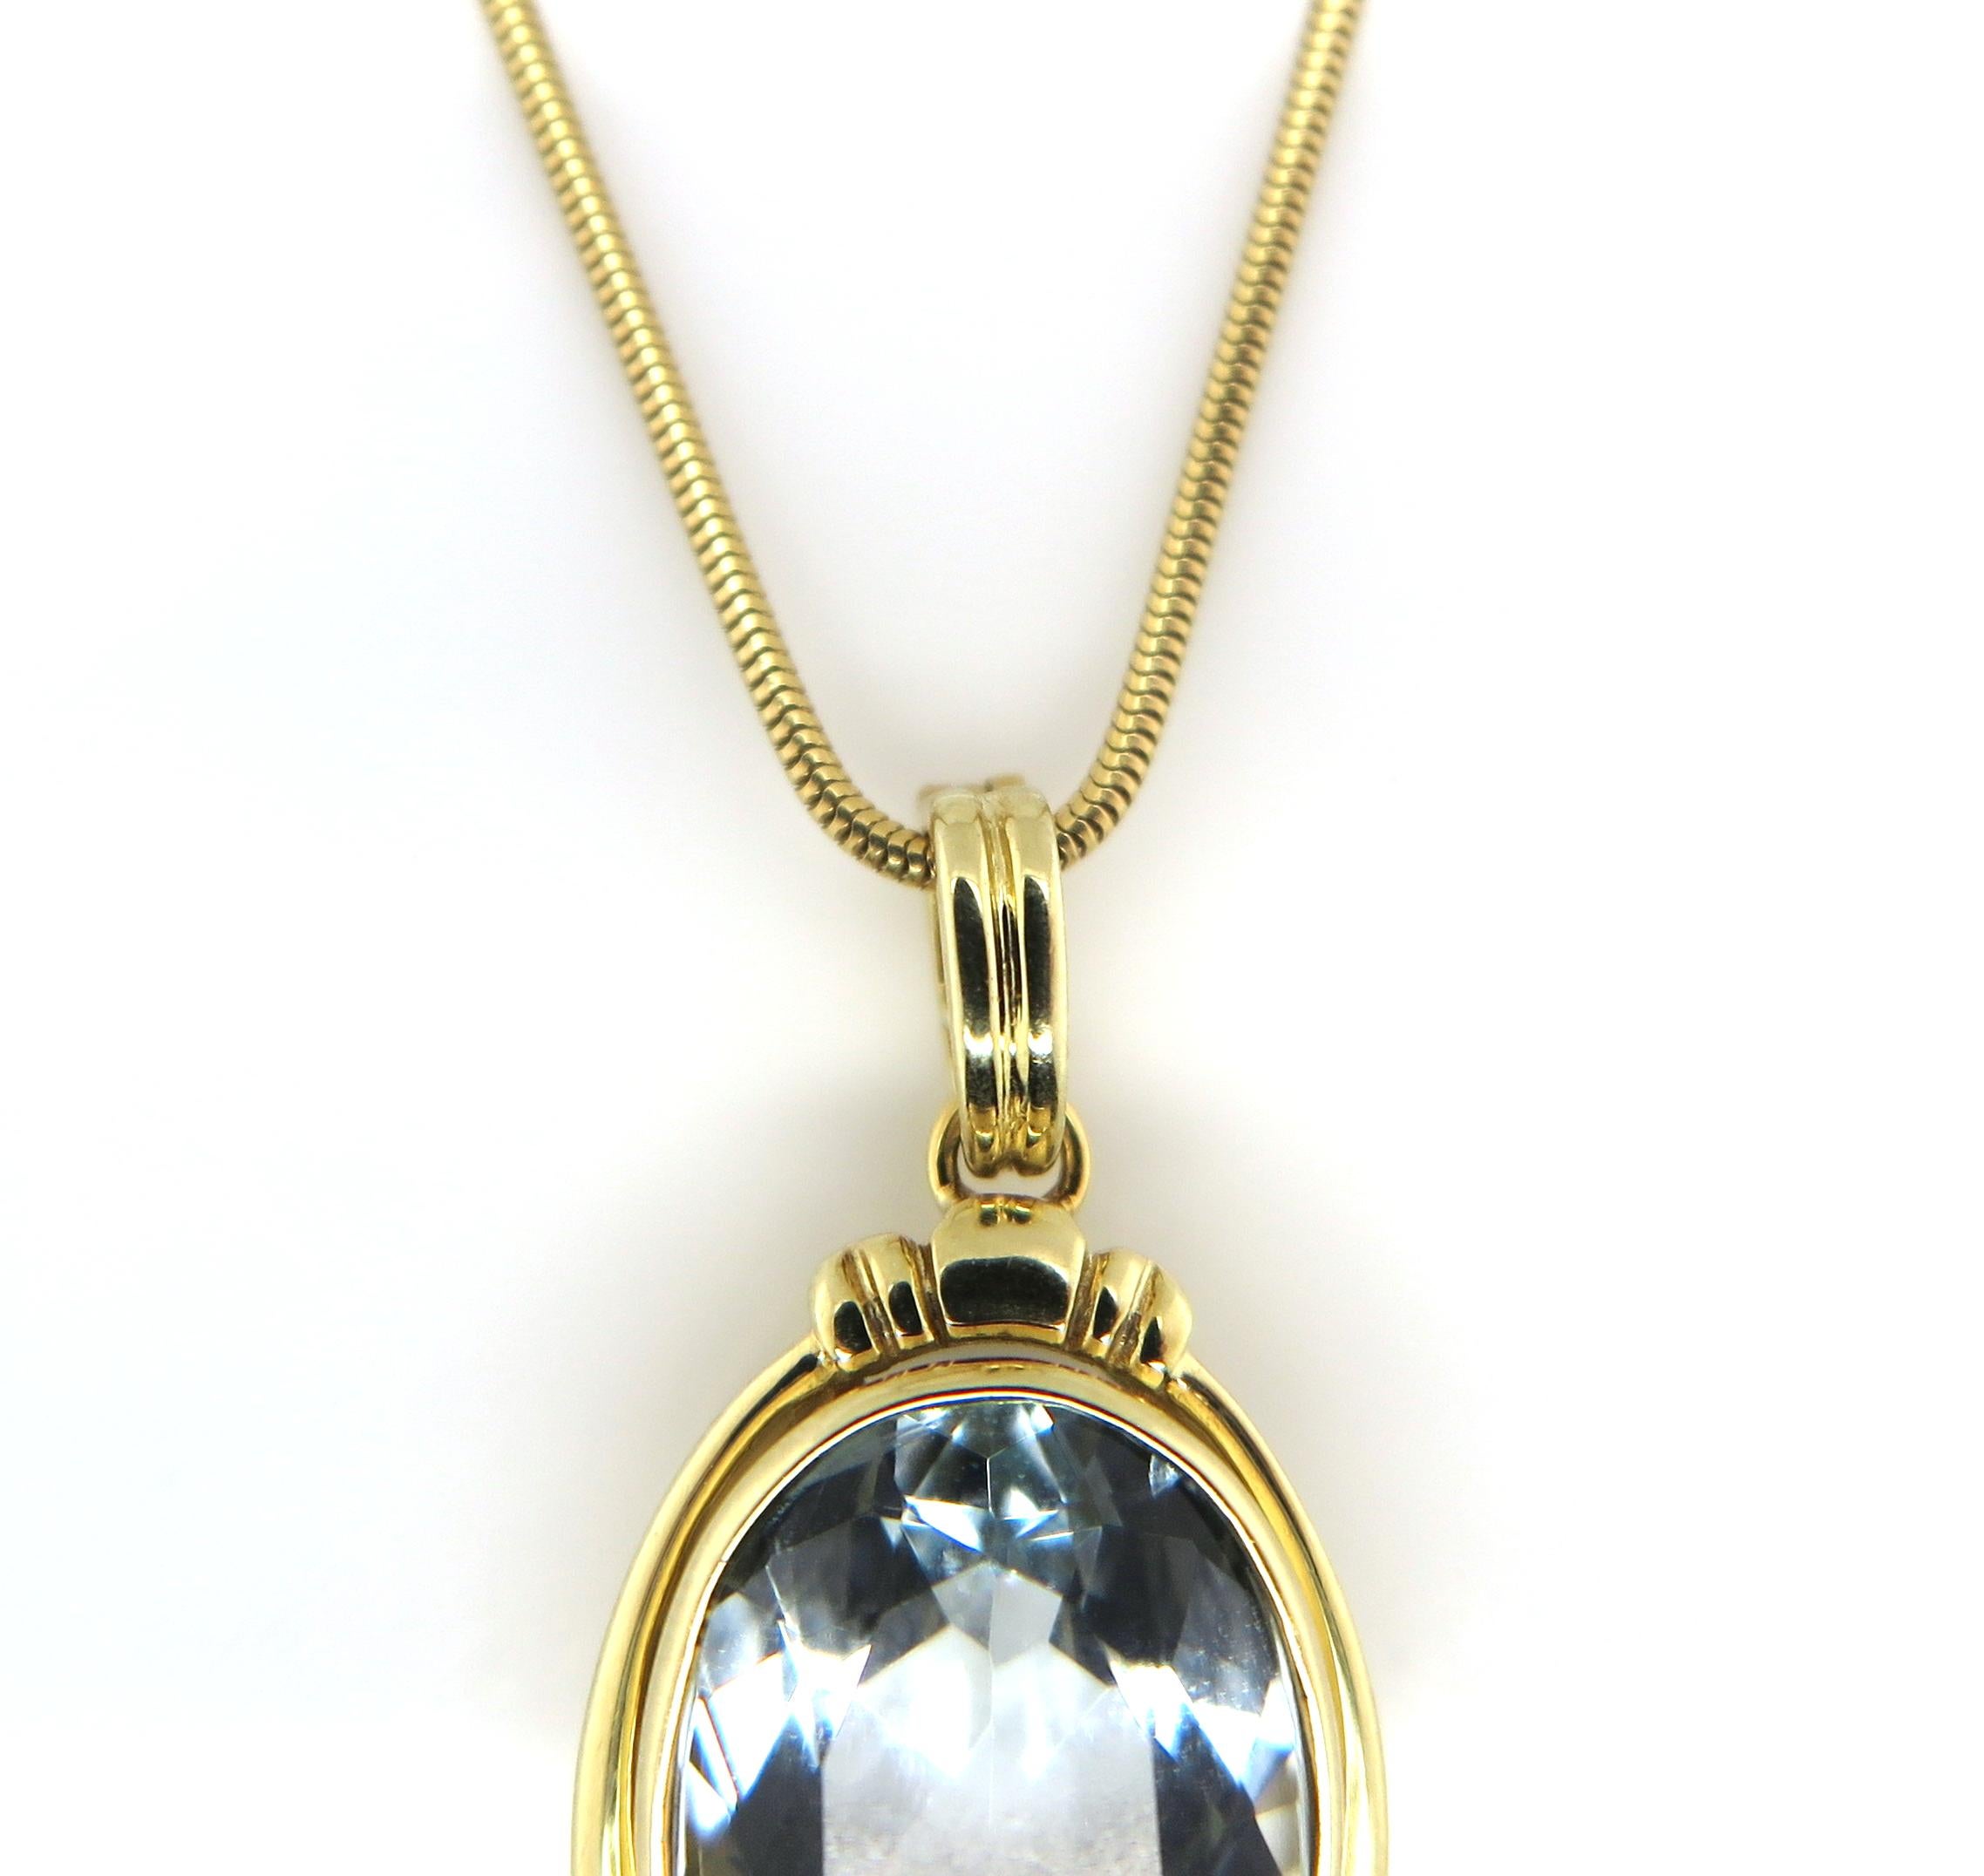 Featuring this stunning 1950s Retro pendant with a Pear cut Aquamarine totalling to 9.30 carat. The stone is set in a beautiful 14k yellow gold intricately handcrafted with floral design and measures 17 inches in lengh.
Details
